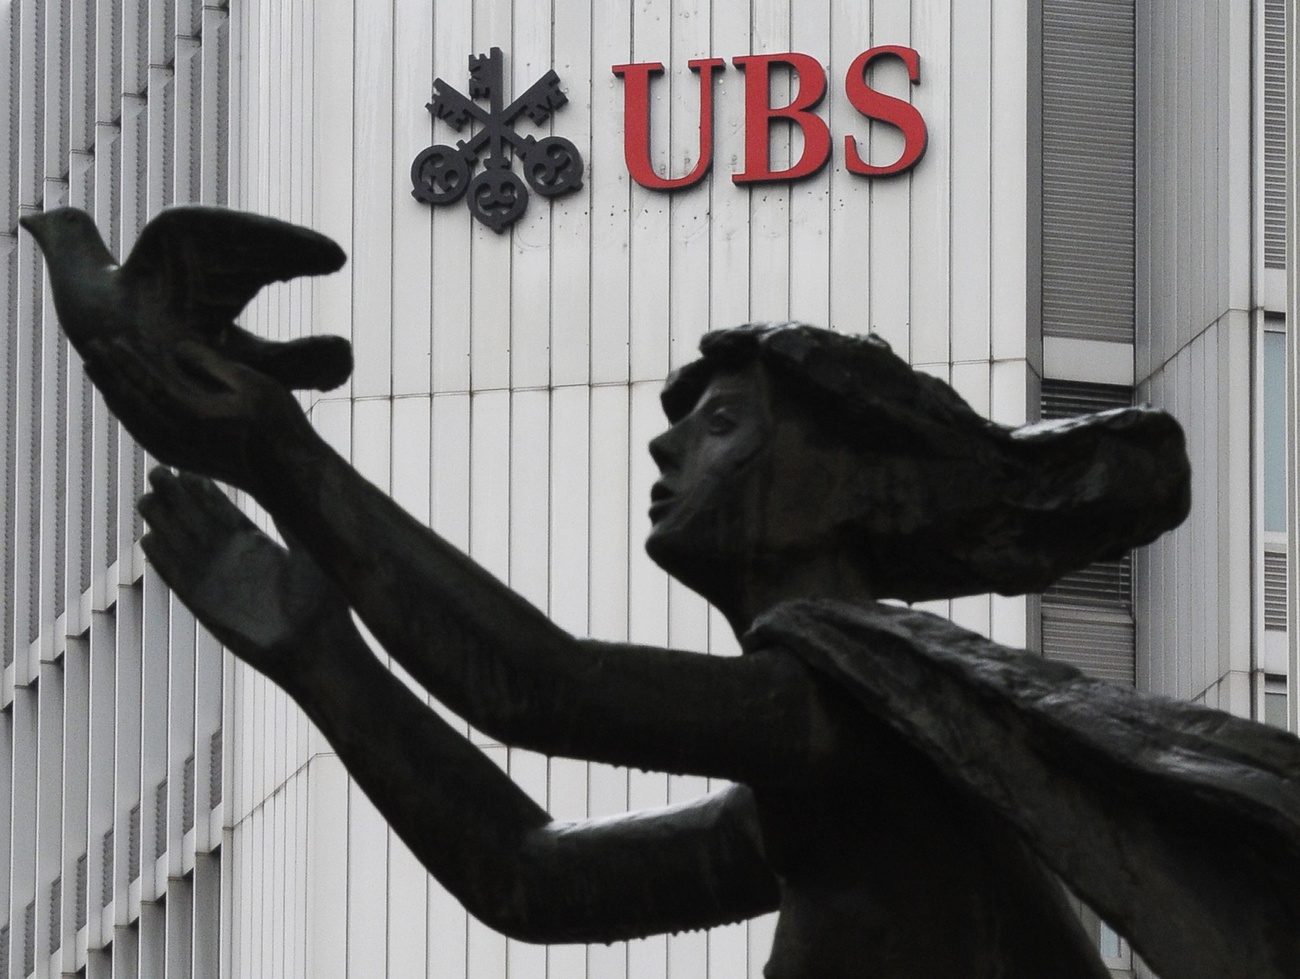 Statue in front of UBS building